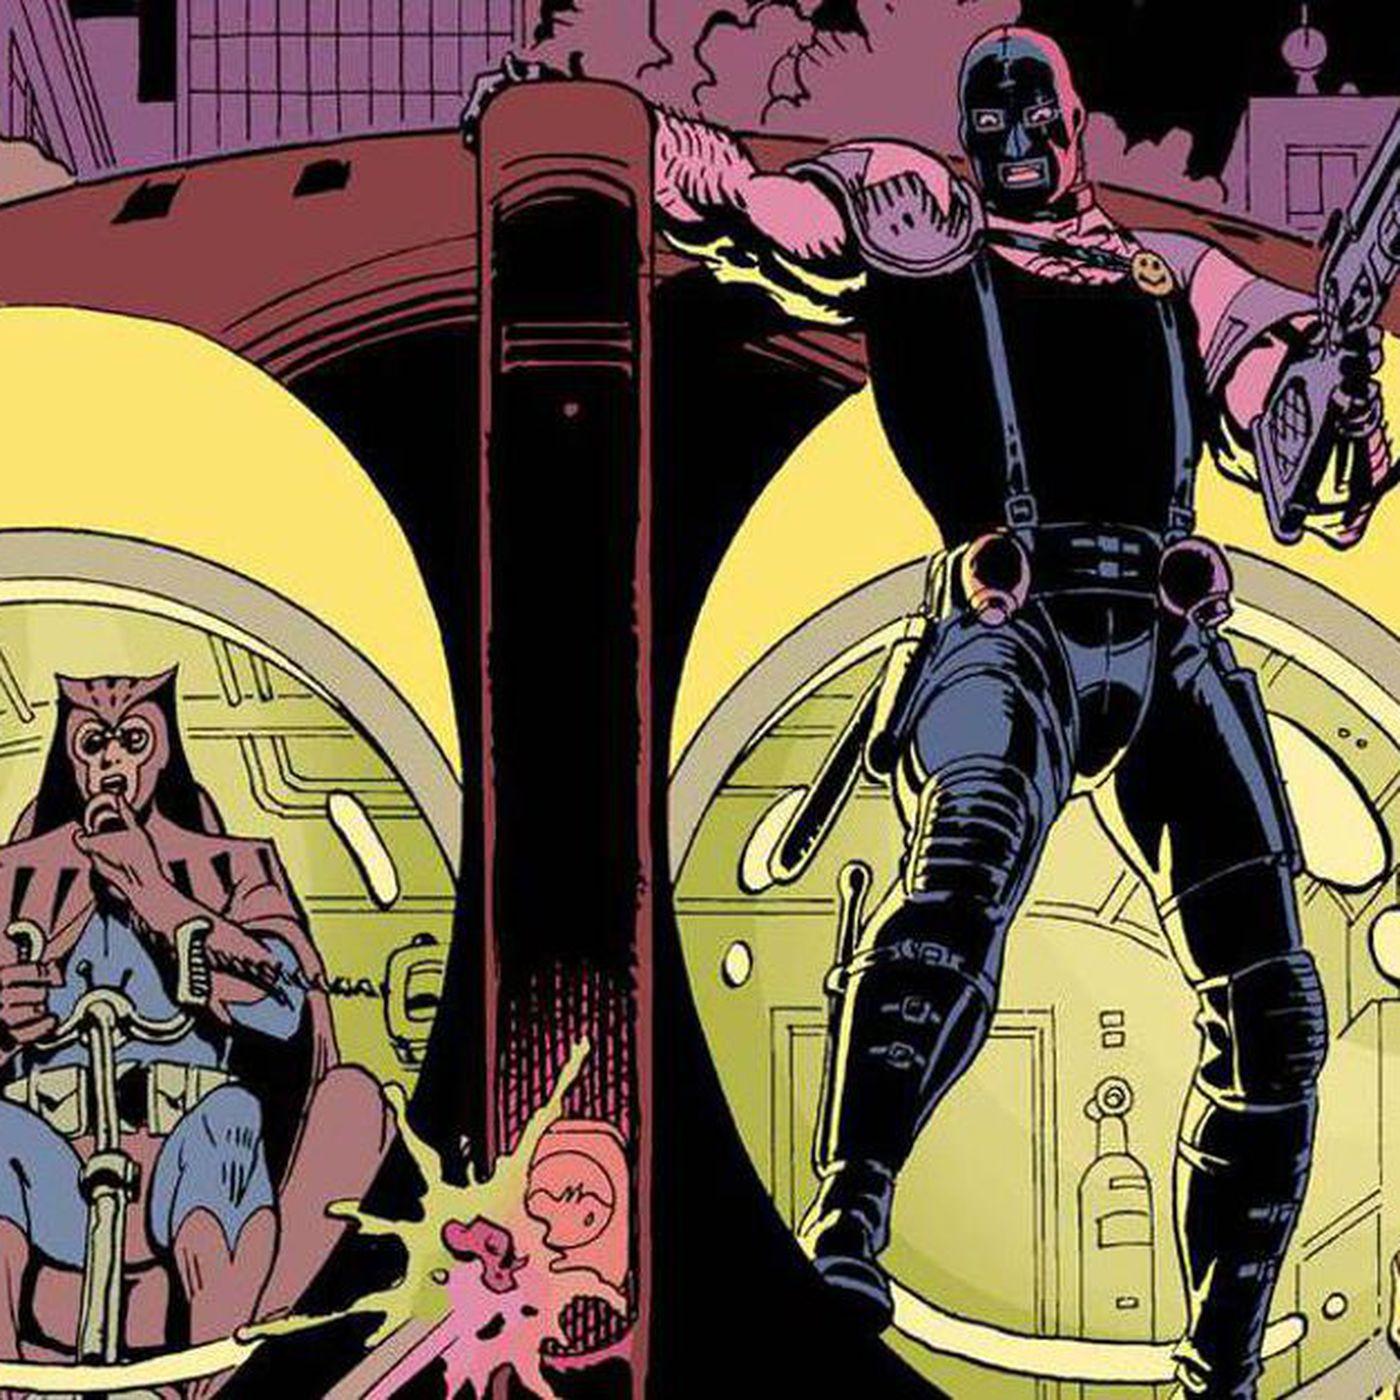 HBO has picked up its Watchmen show for a full season